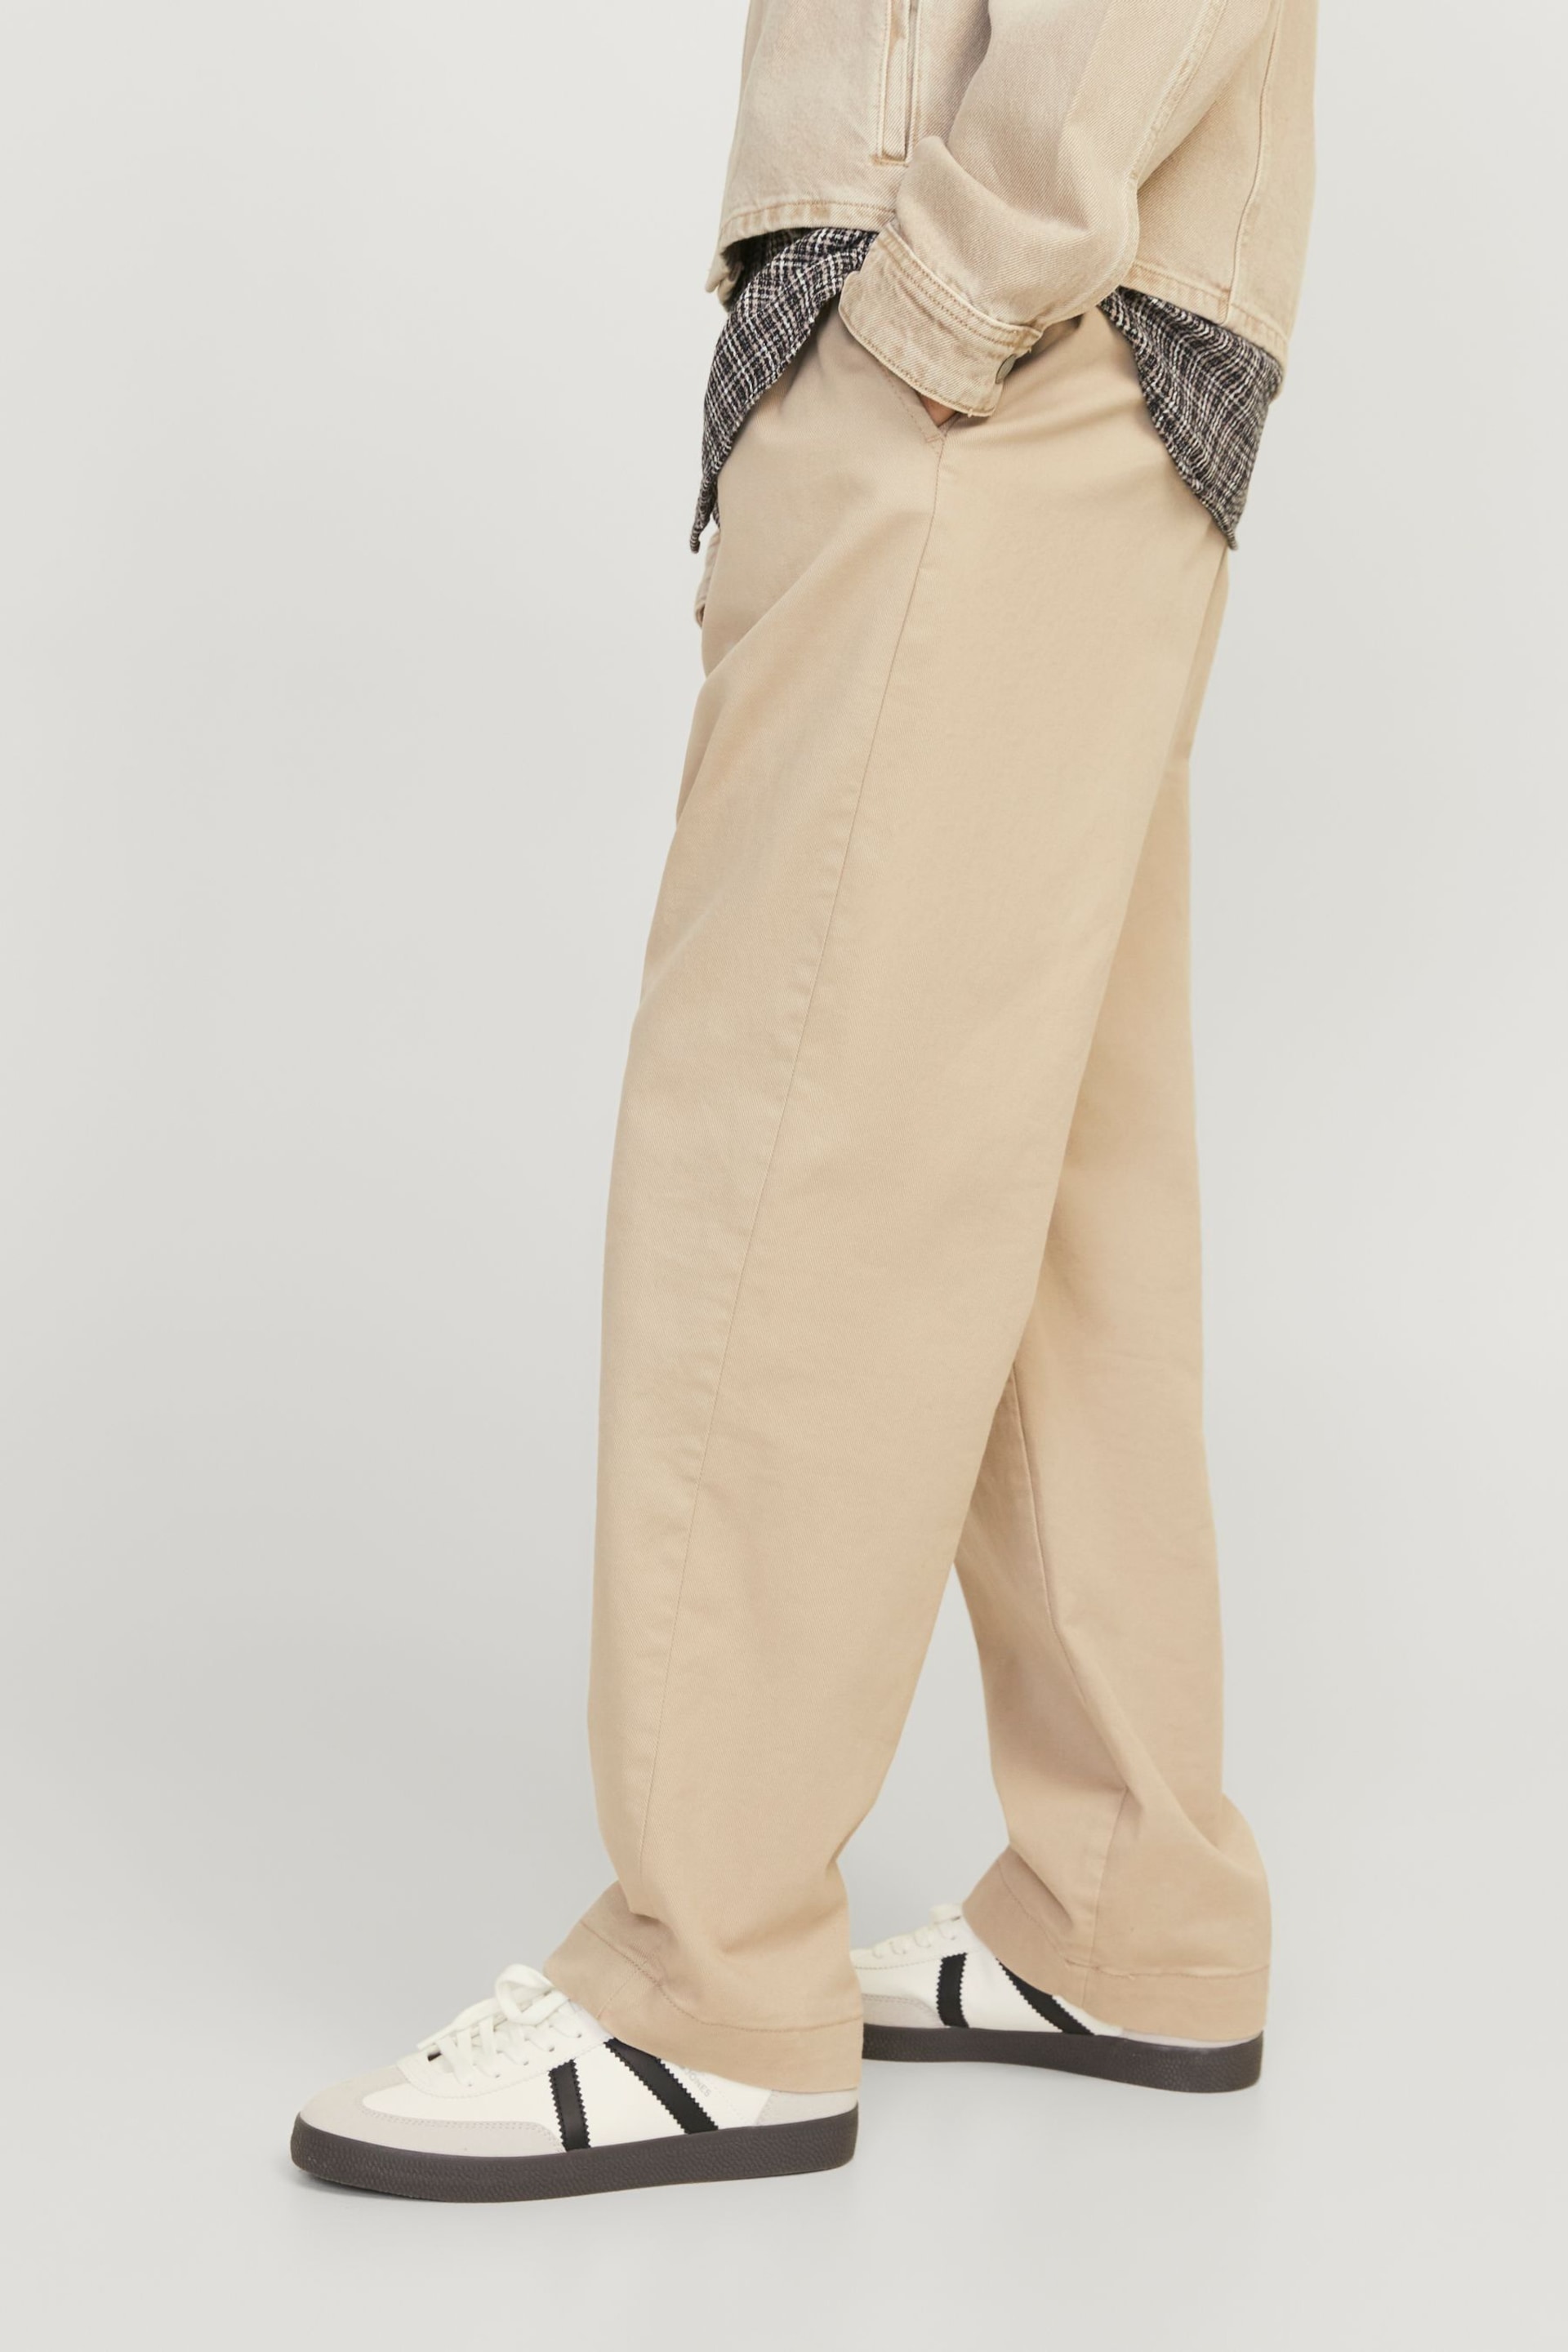 JACK & JONES Brown Wide Fit Relaxed Trousers - Image 5 of 8